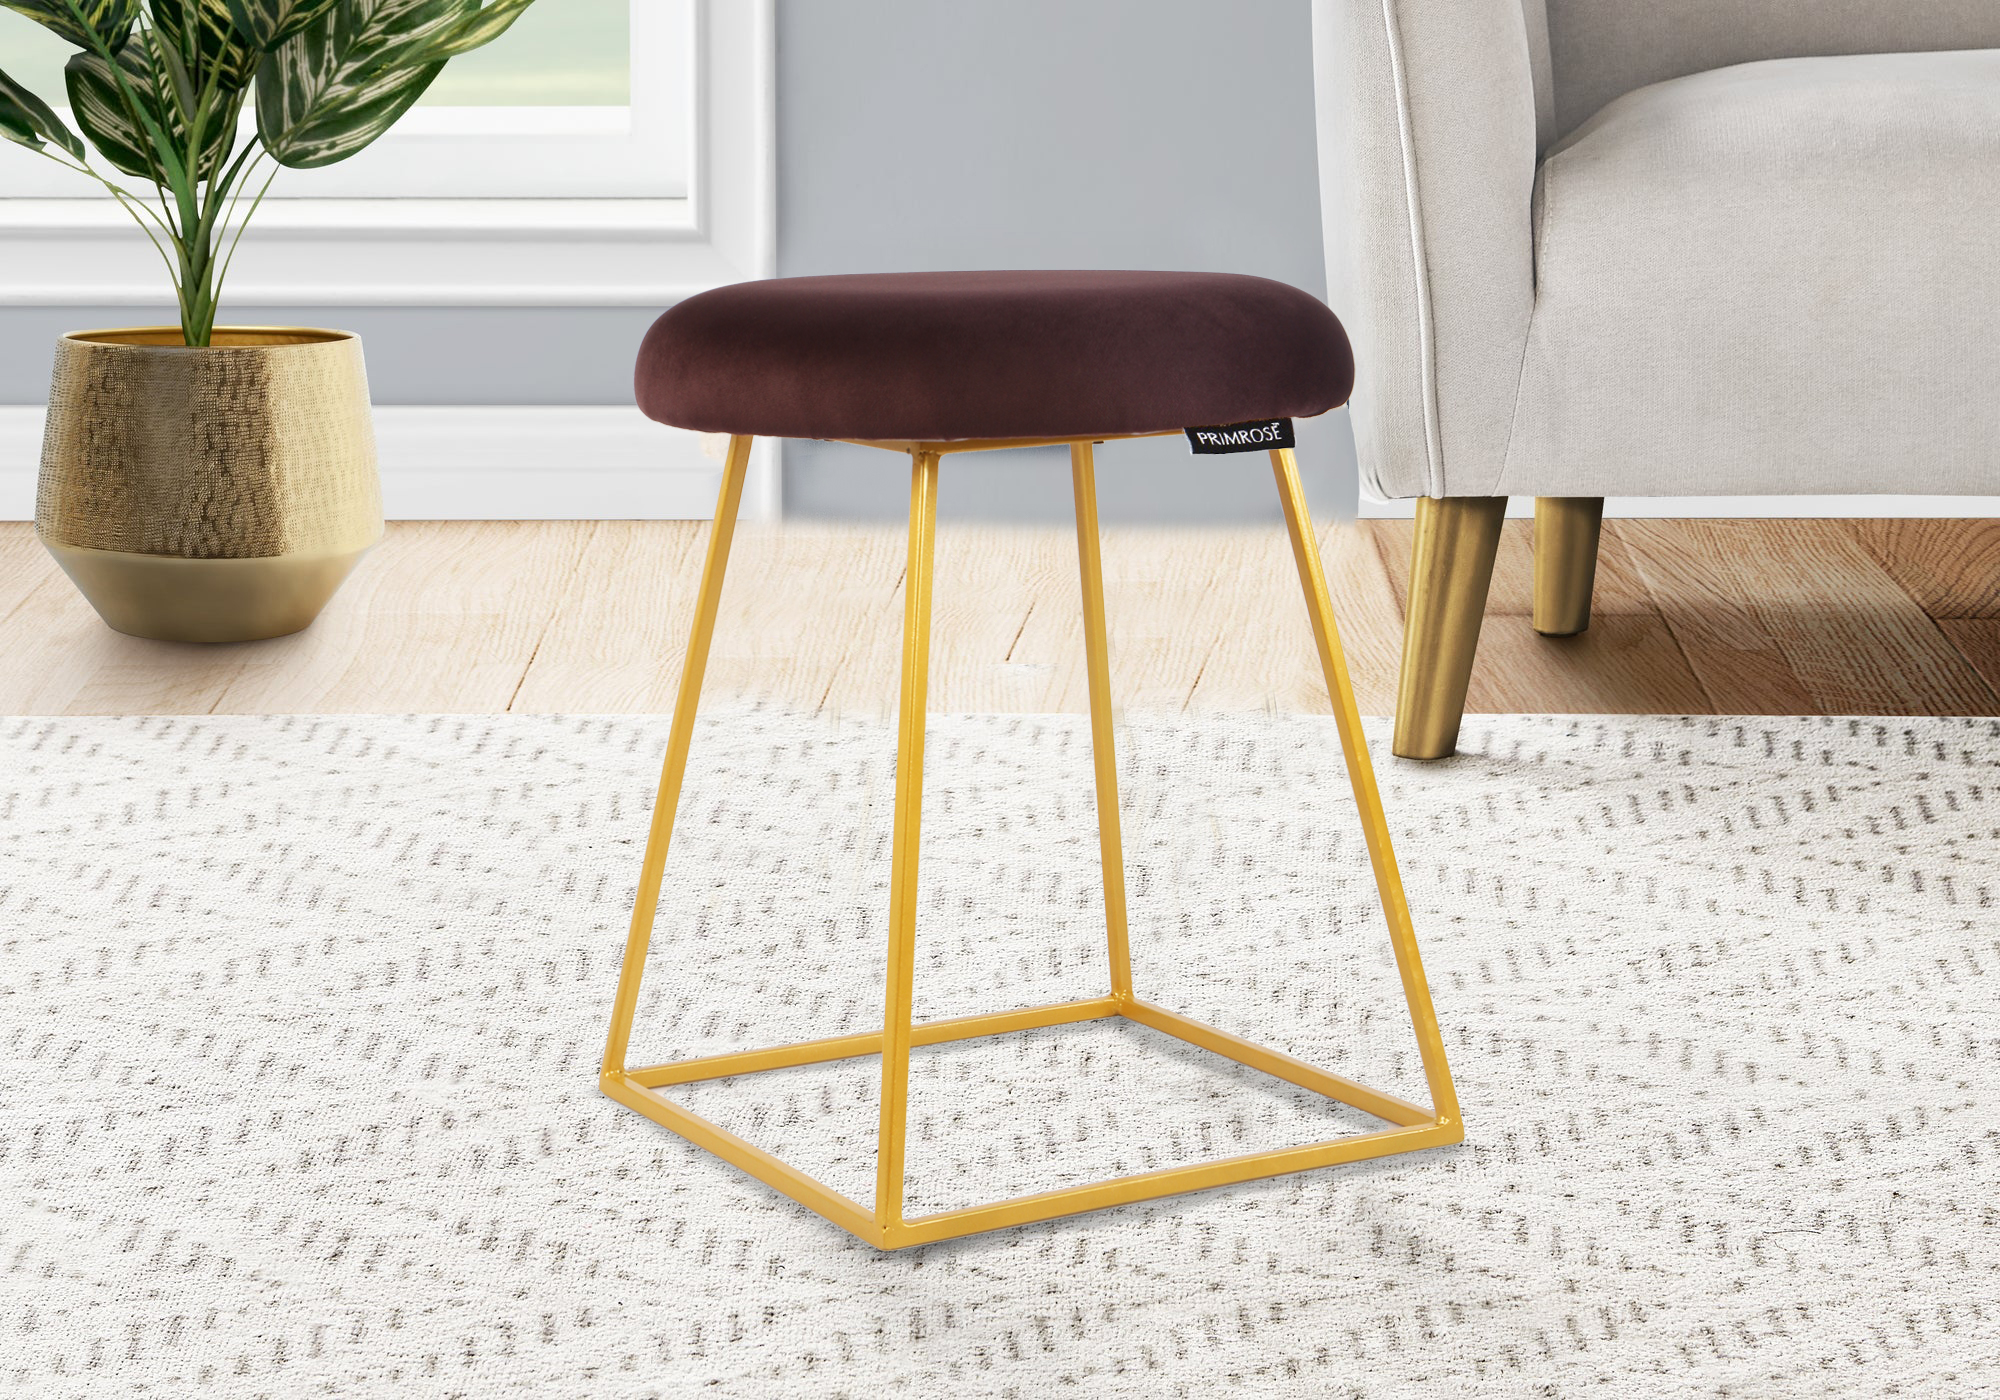 Primrose Ottoman Pristy - Comfortable Upholstered Stool With Brawny Golden Metal Frame Stand And Delicate But Supple Velvet Fabric Wrapped Over  